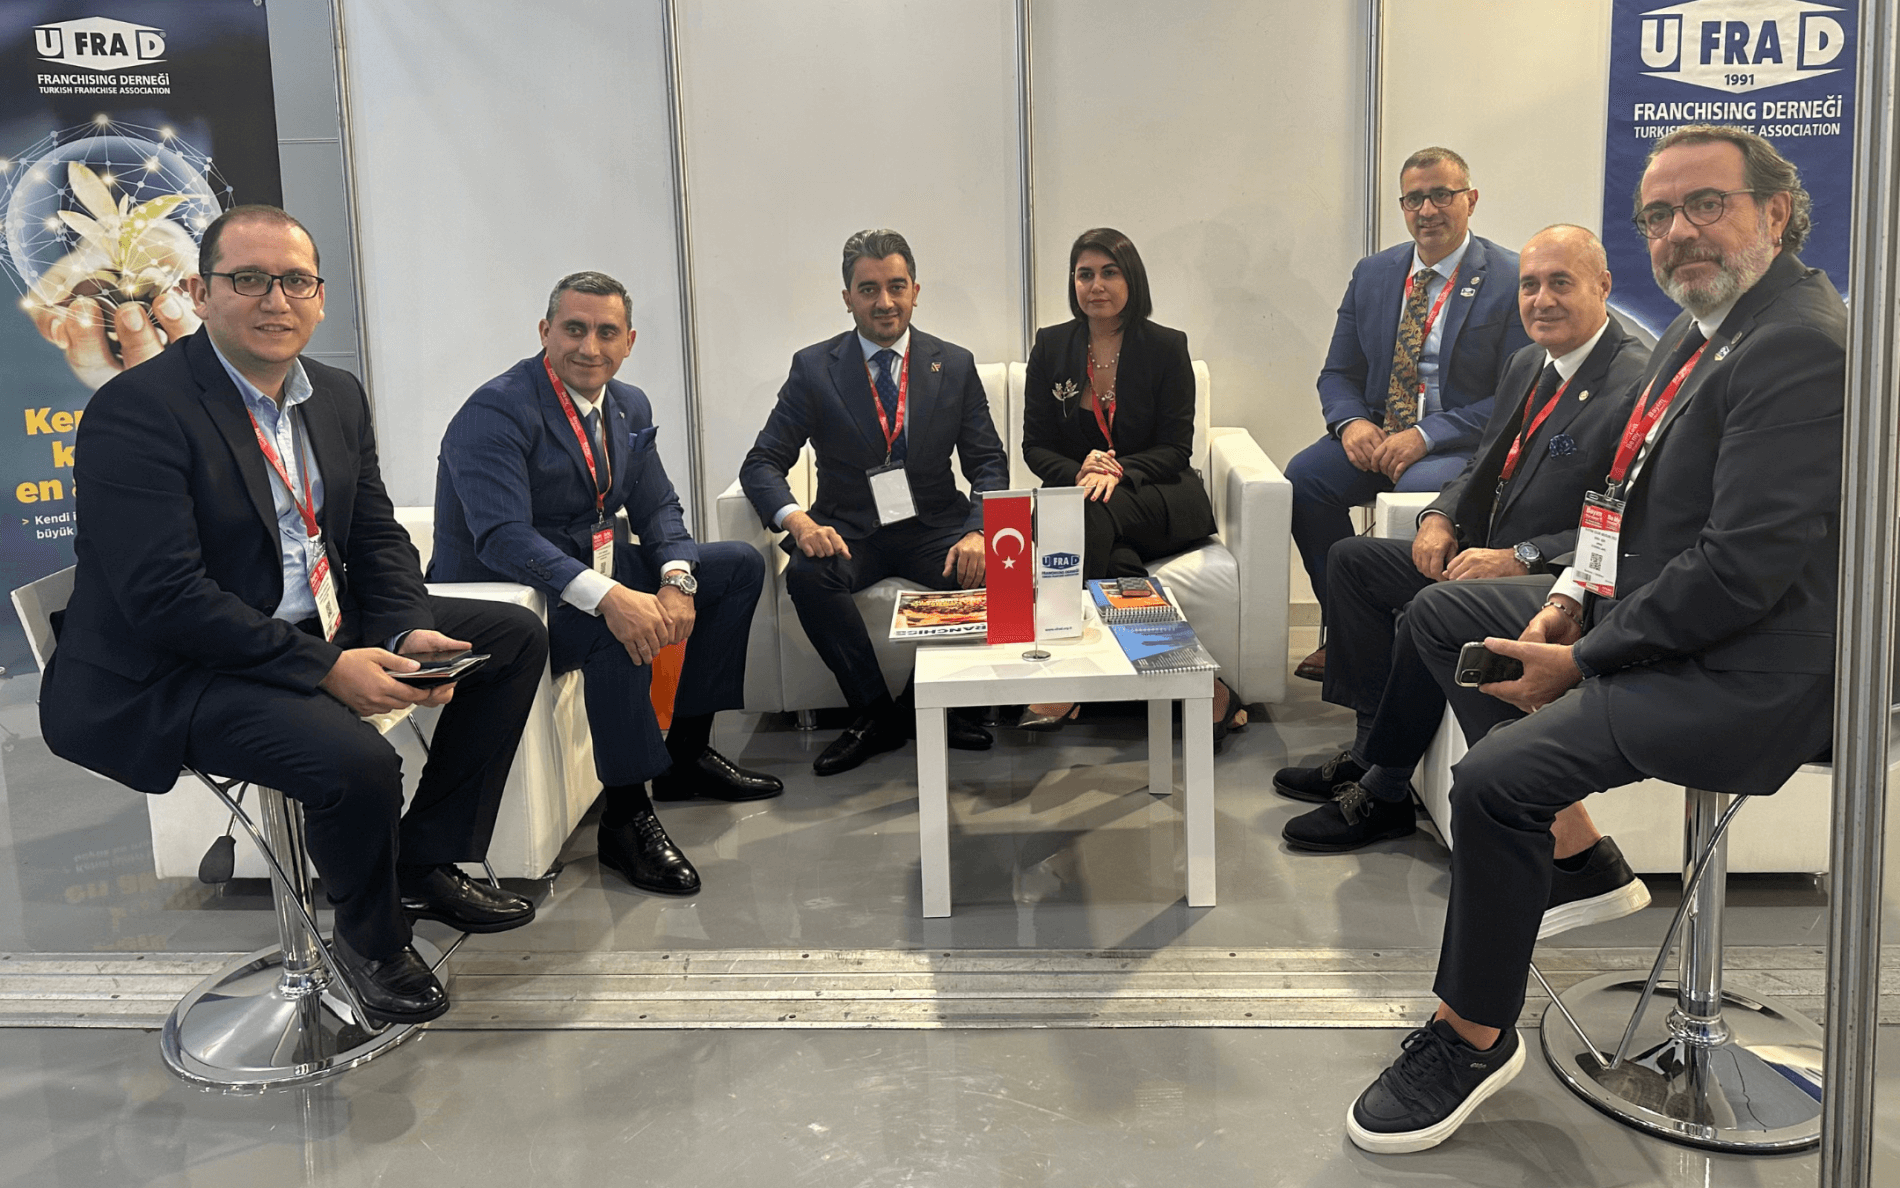 The Board of Directors of the Azerbaijan Franchise Association "Bayim Olurmusun?" at the exhibition